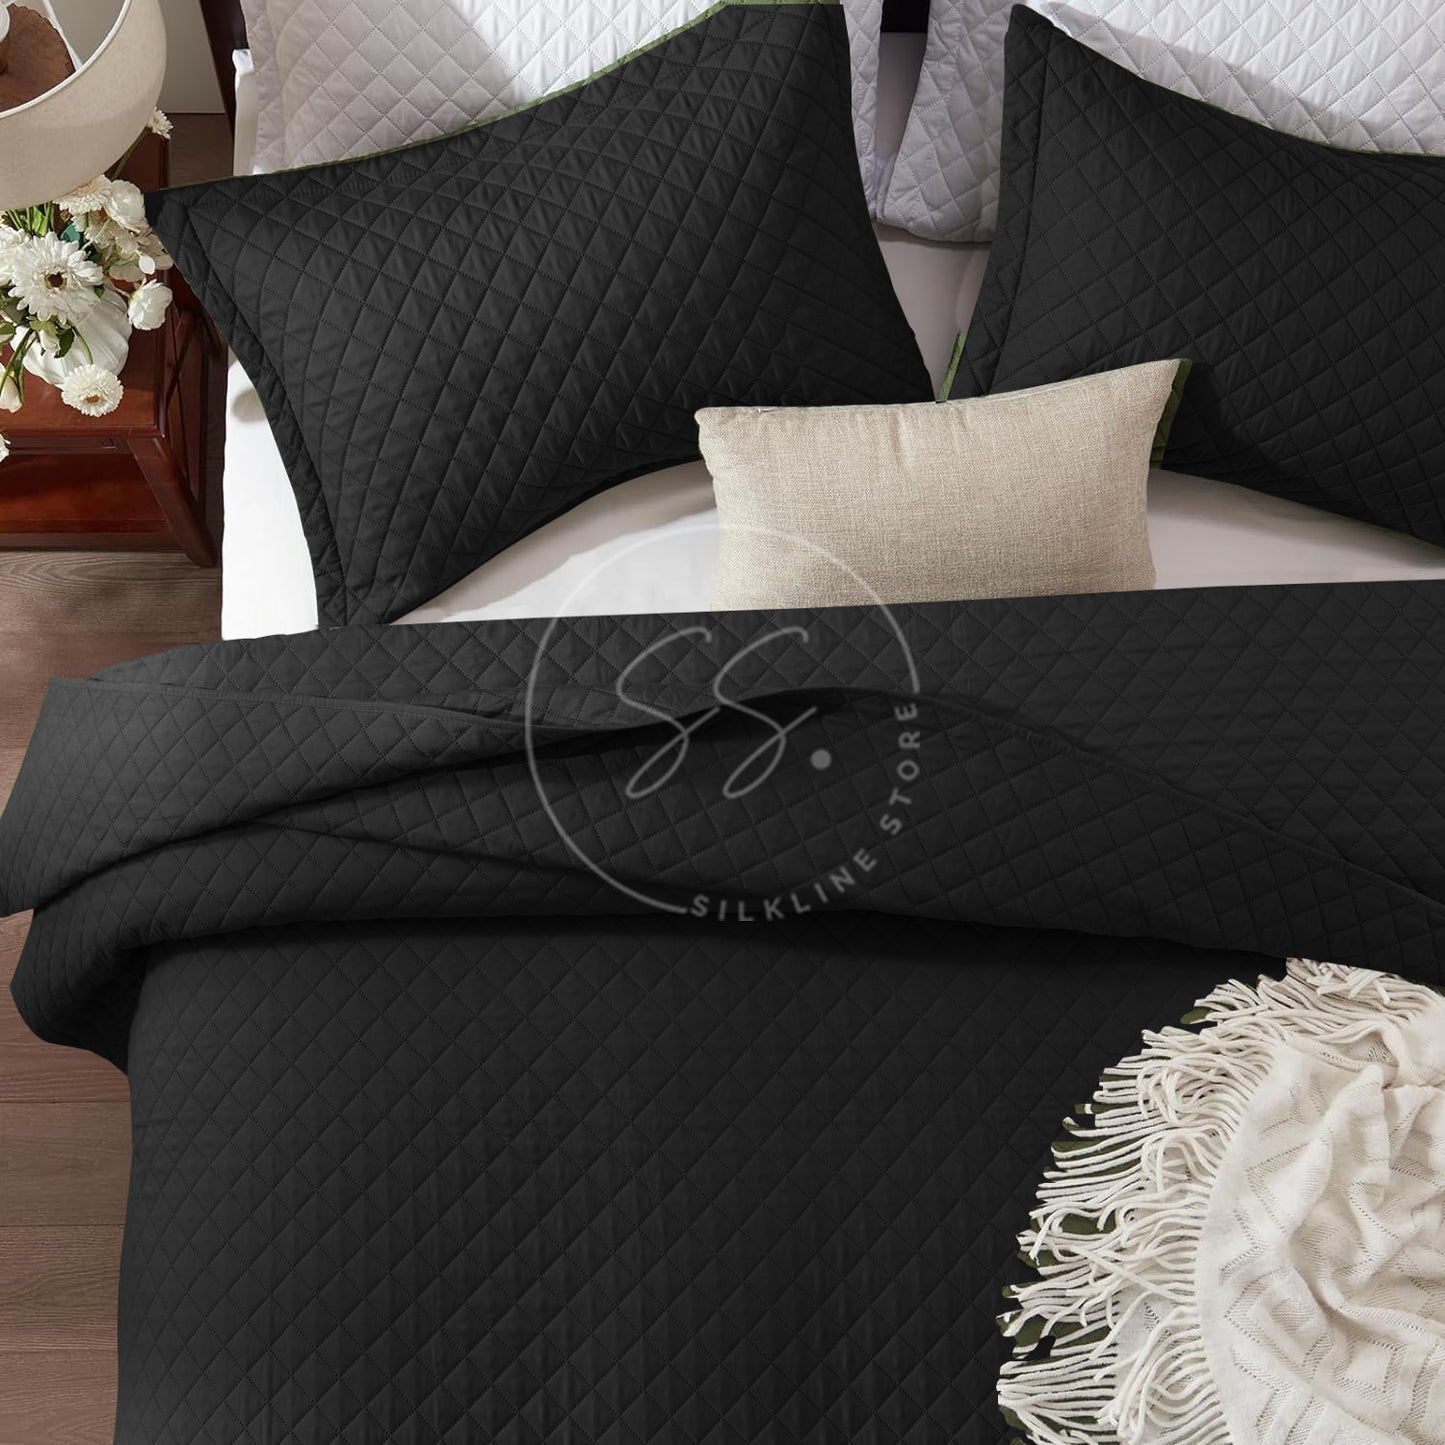 Midnight Black - king Size Microfibre: 3 pcs Quilted bedspread set